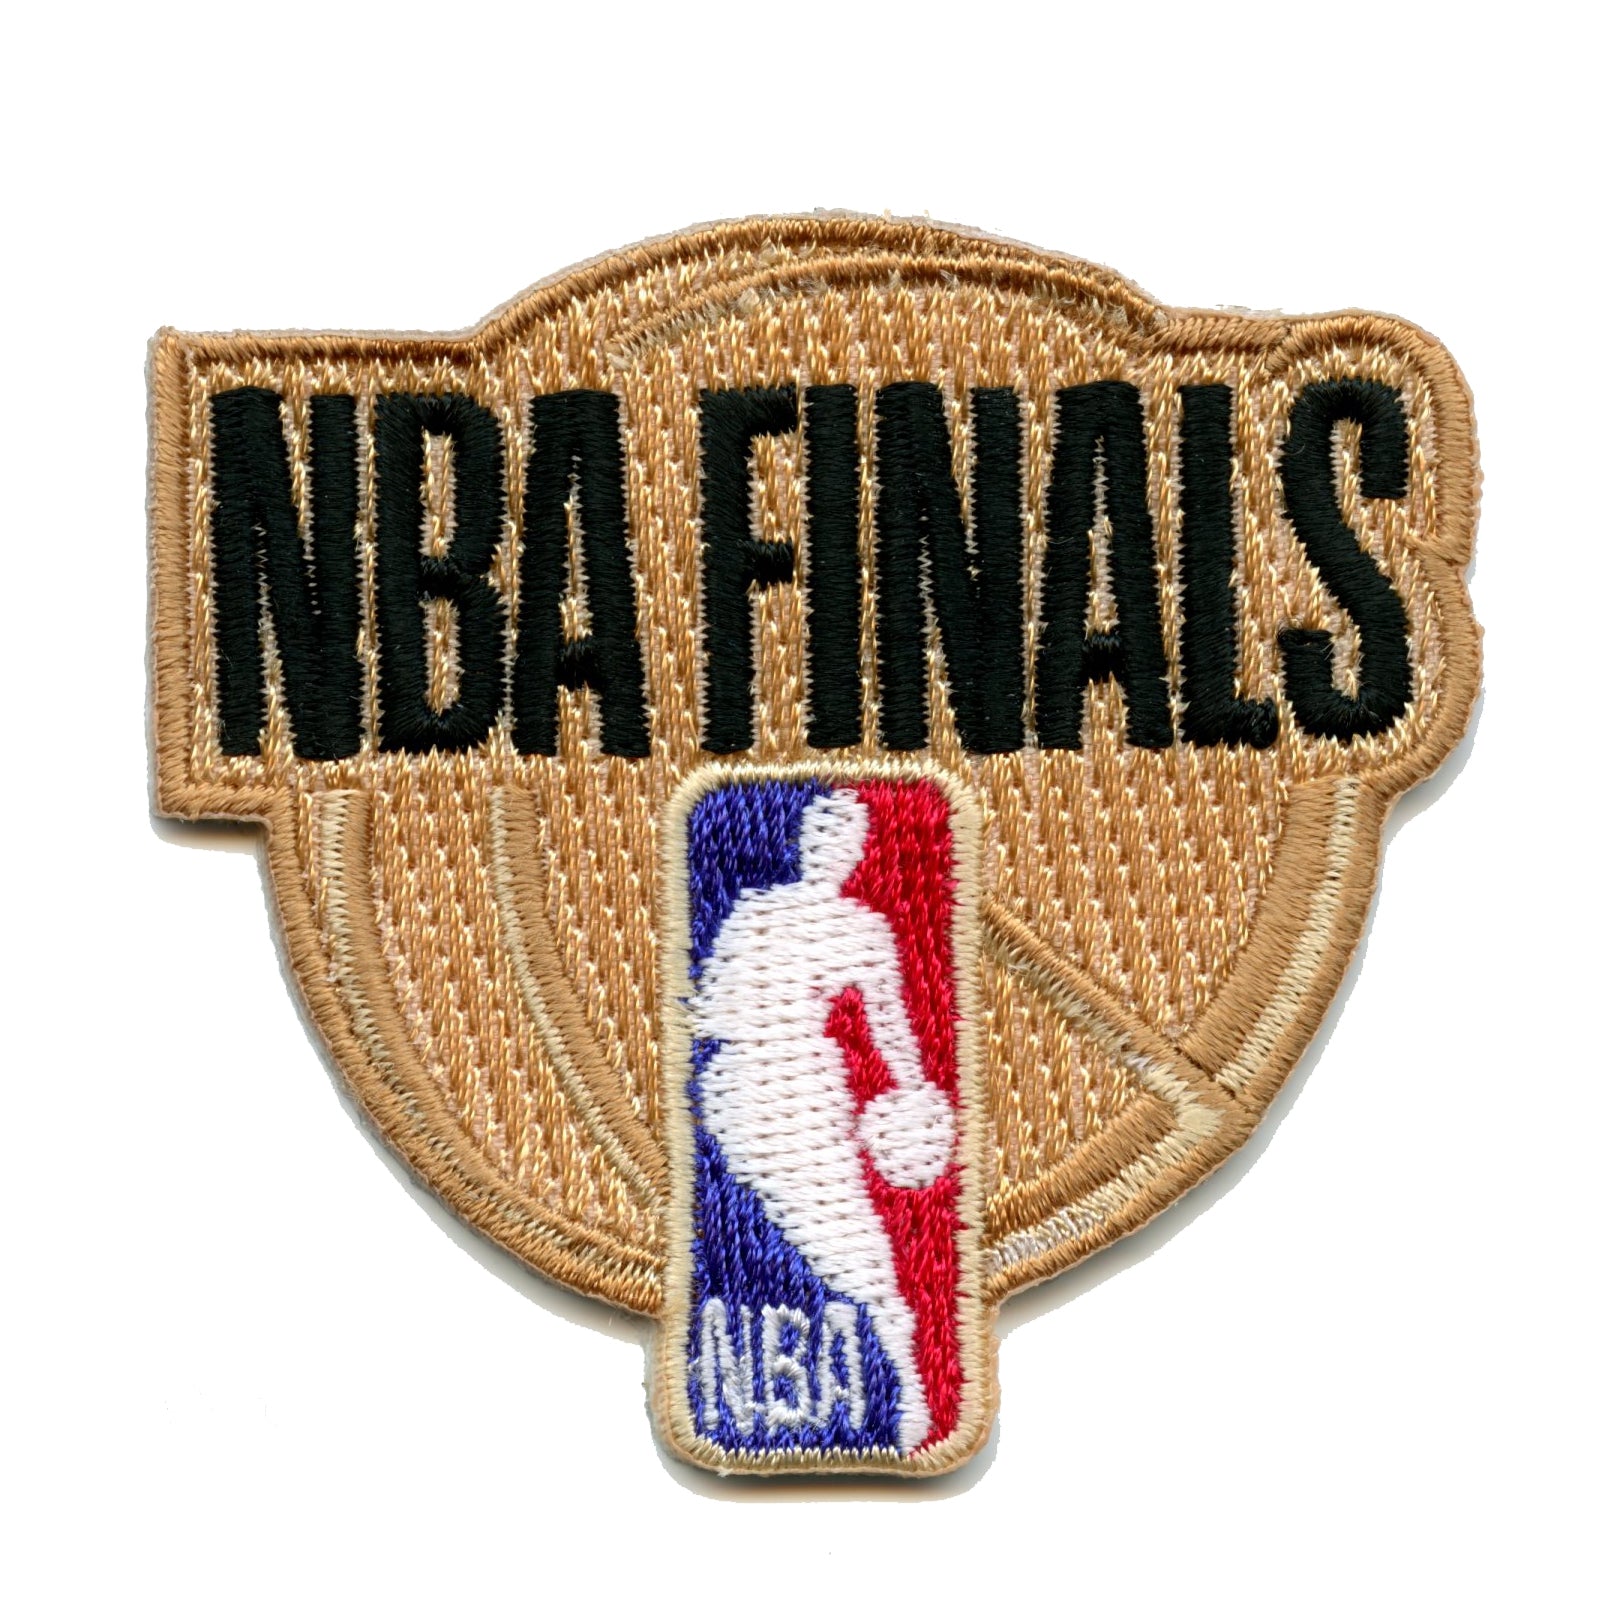 League, All Star & Championship NBA PATCHES